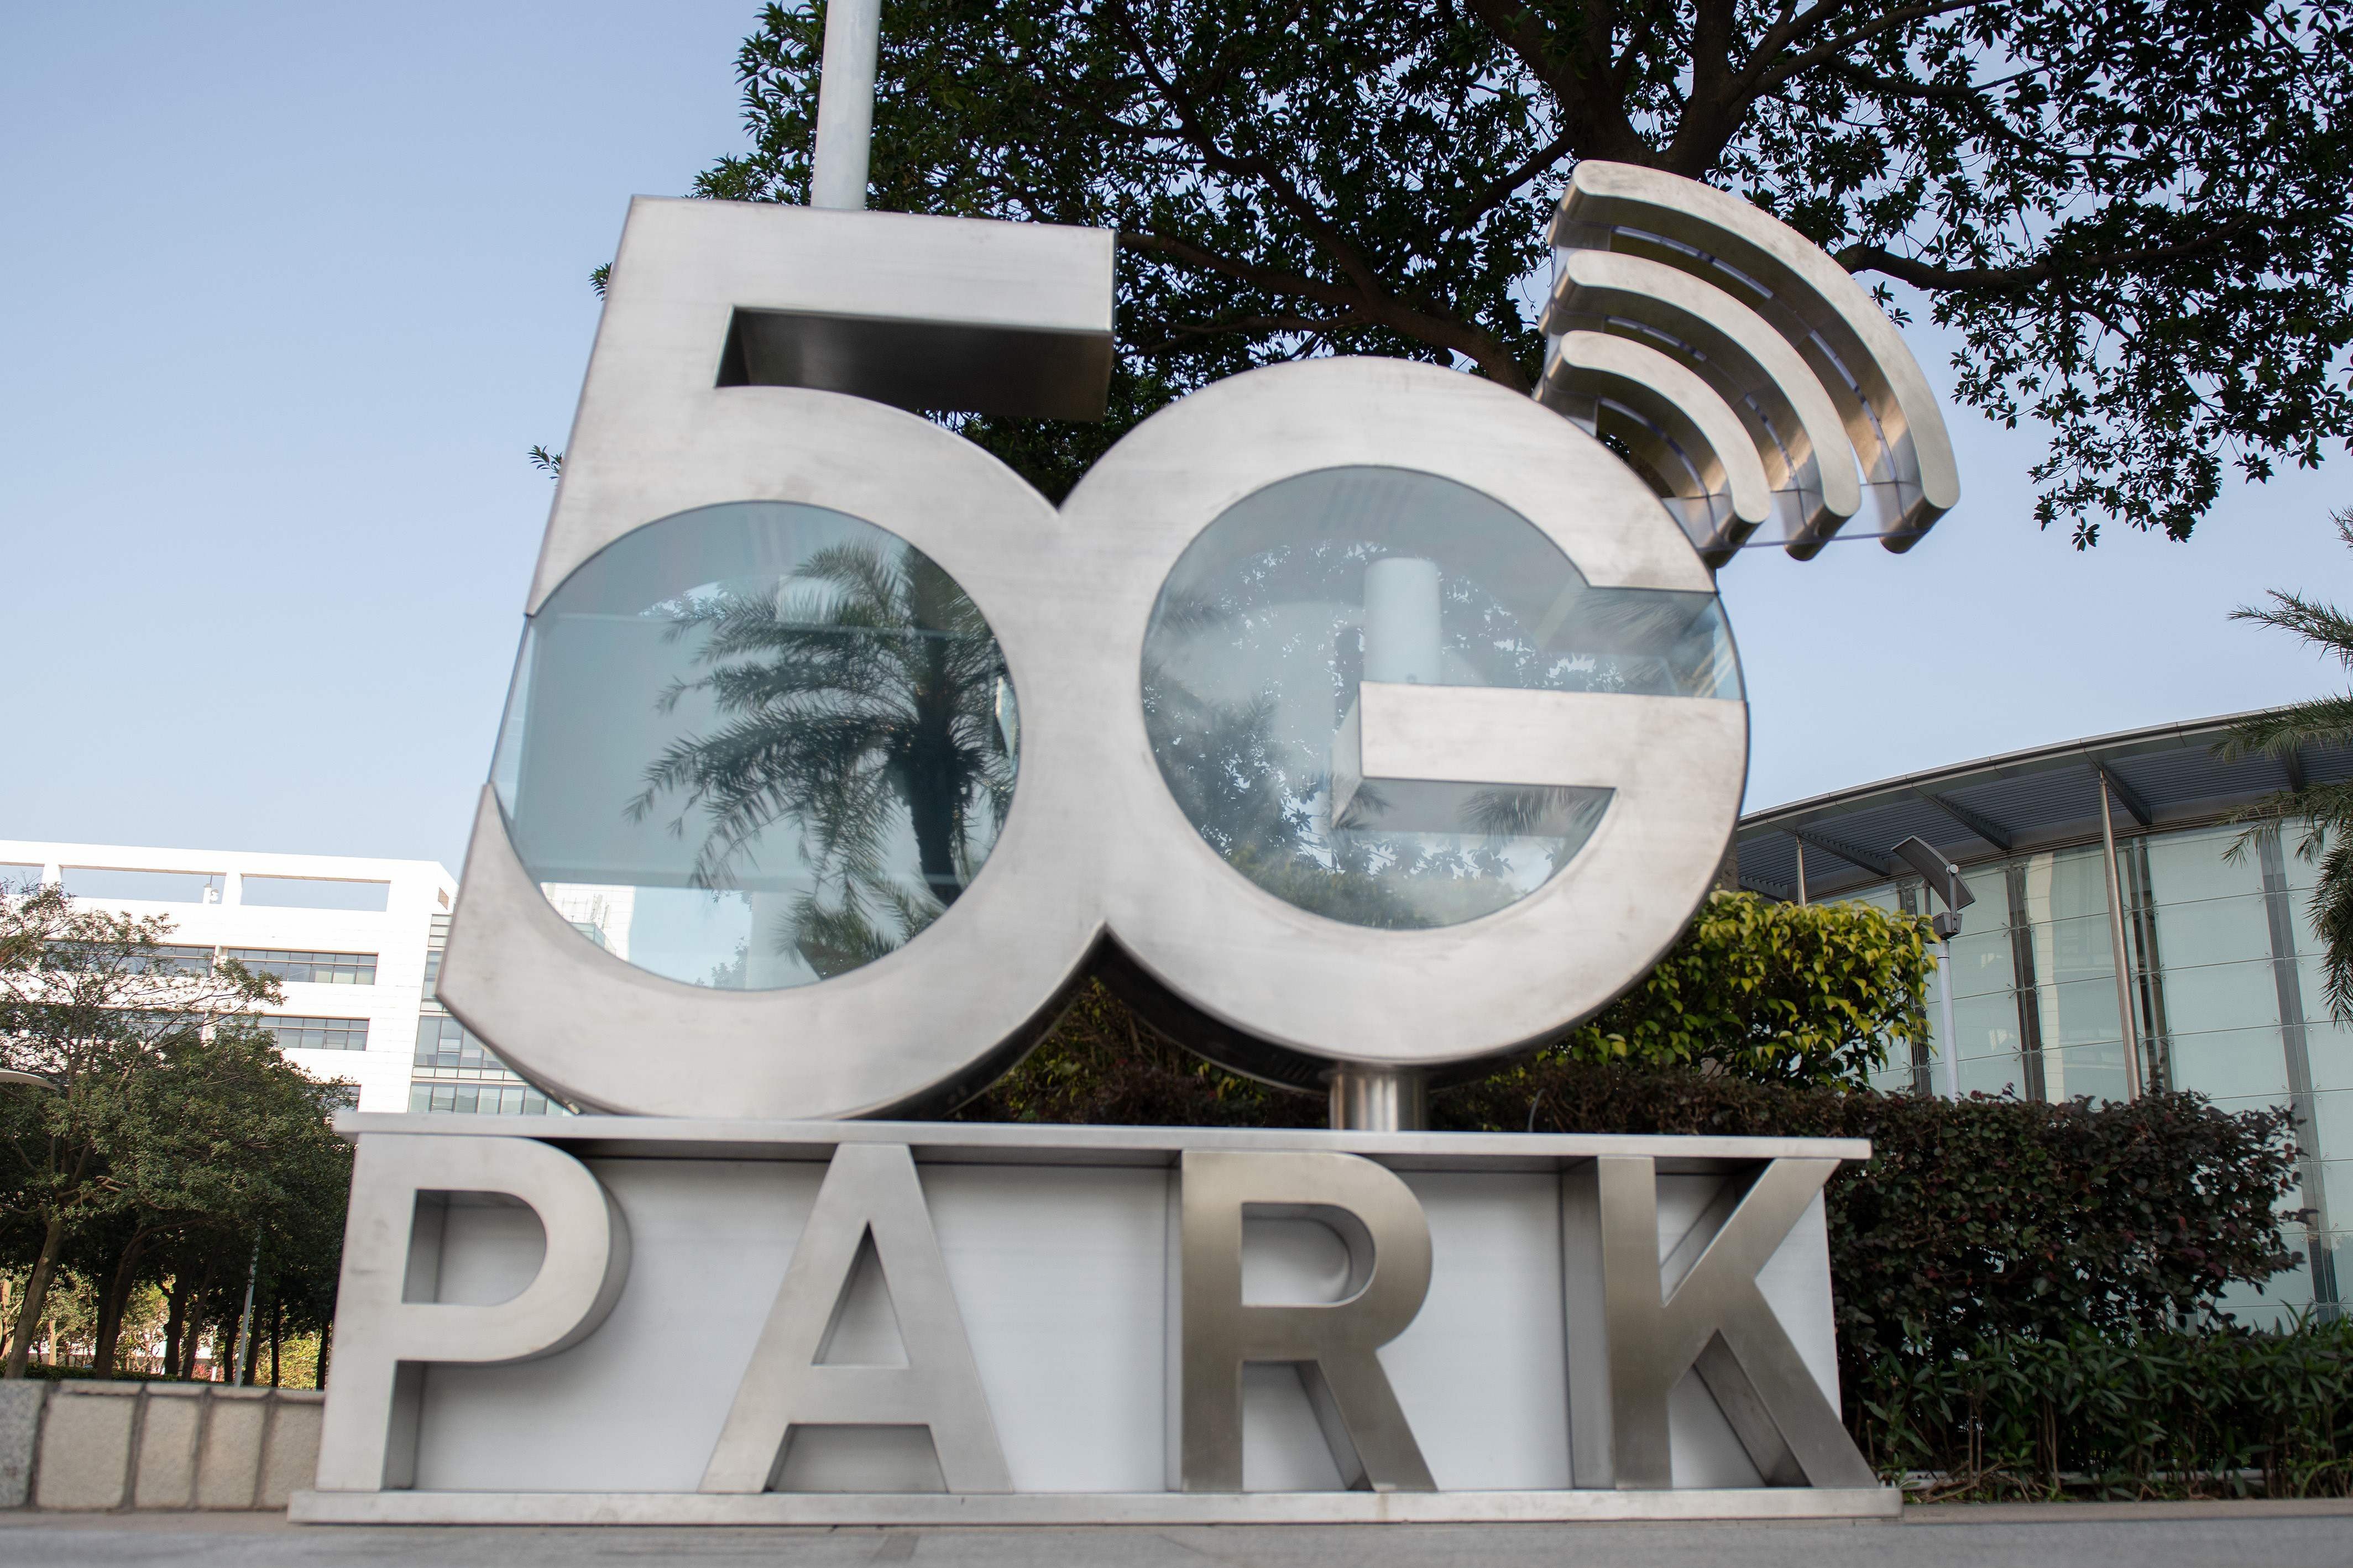 A sign announces a “5G Park” at Huawei’s global headquarters in Shenzhen. Photo: Agence France-Presse